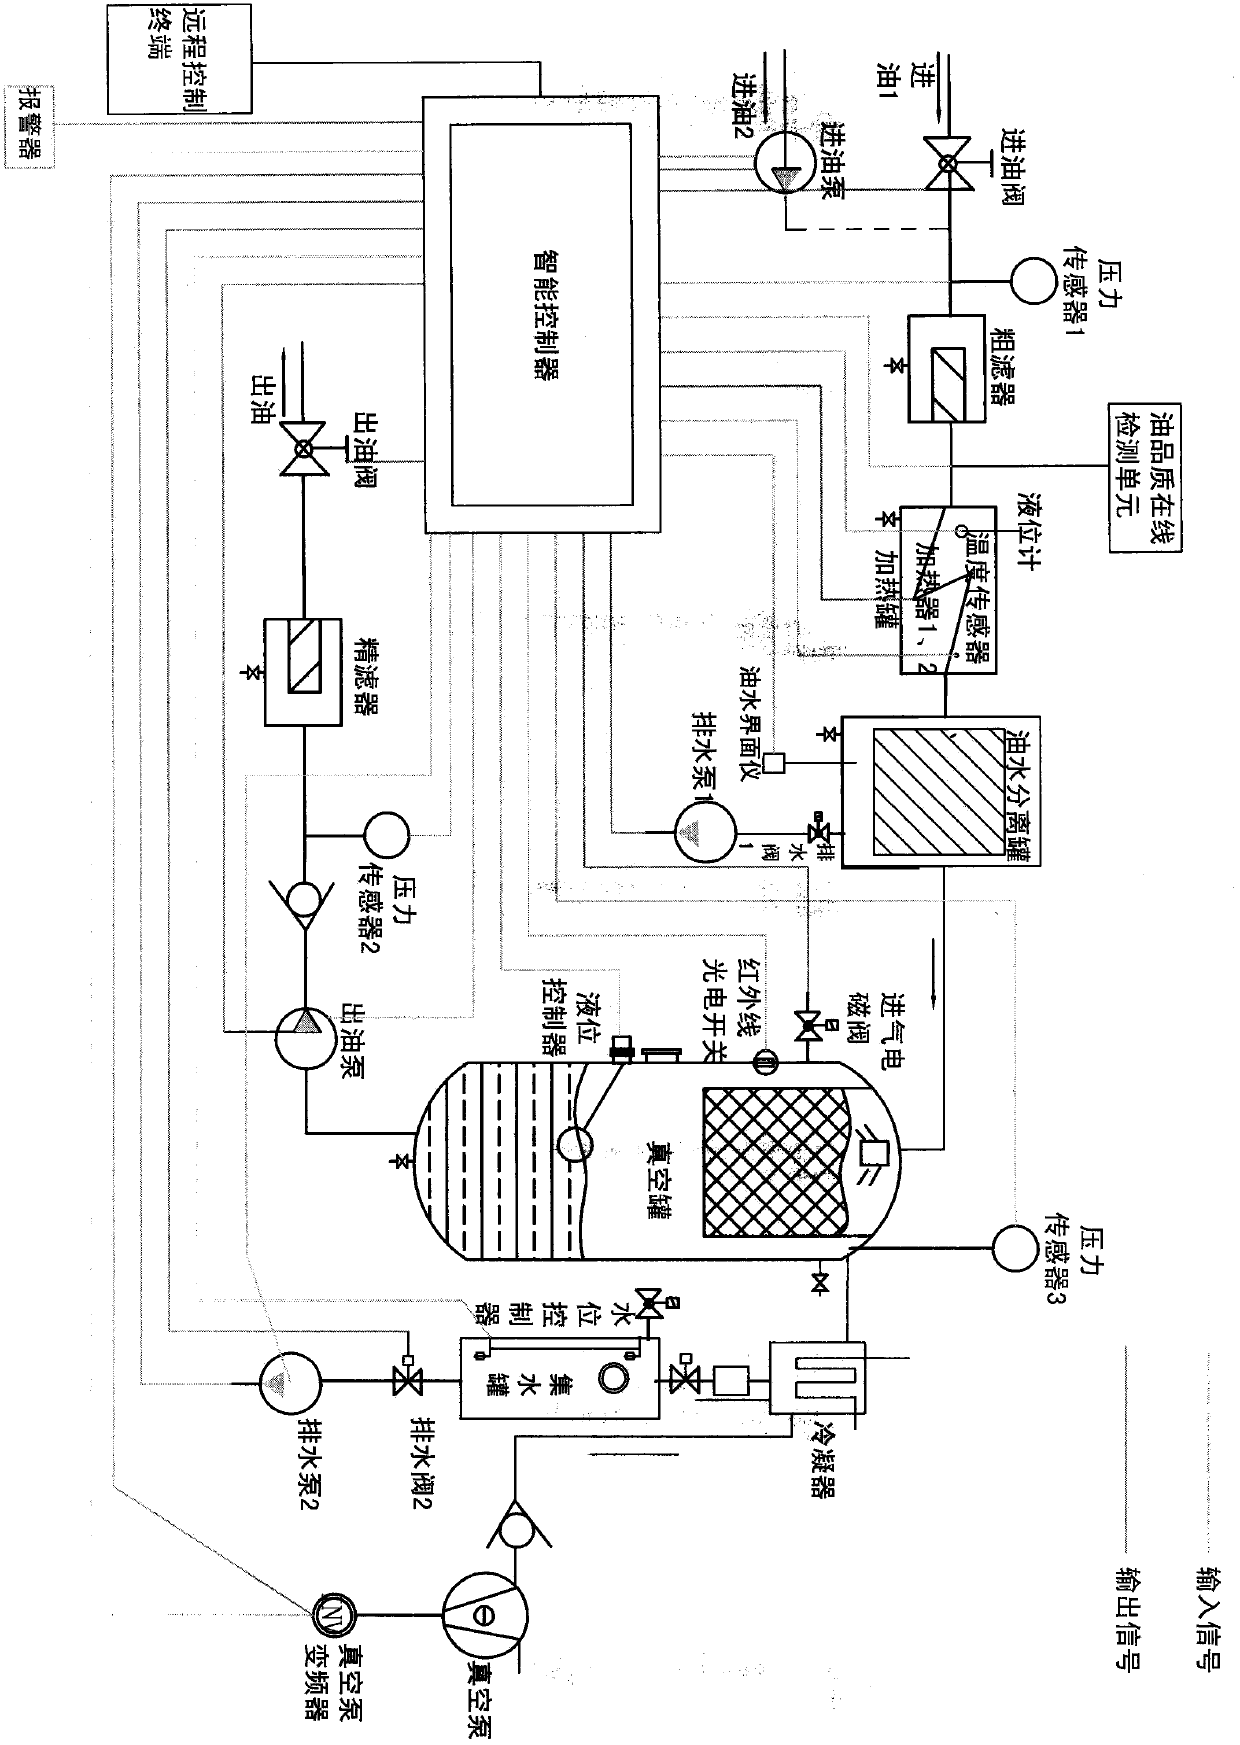 Control method for oil purifier integrated with automatic detection and purification, and intelligent controller thereof